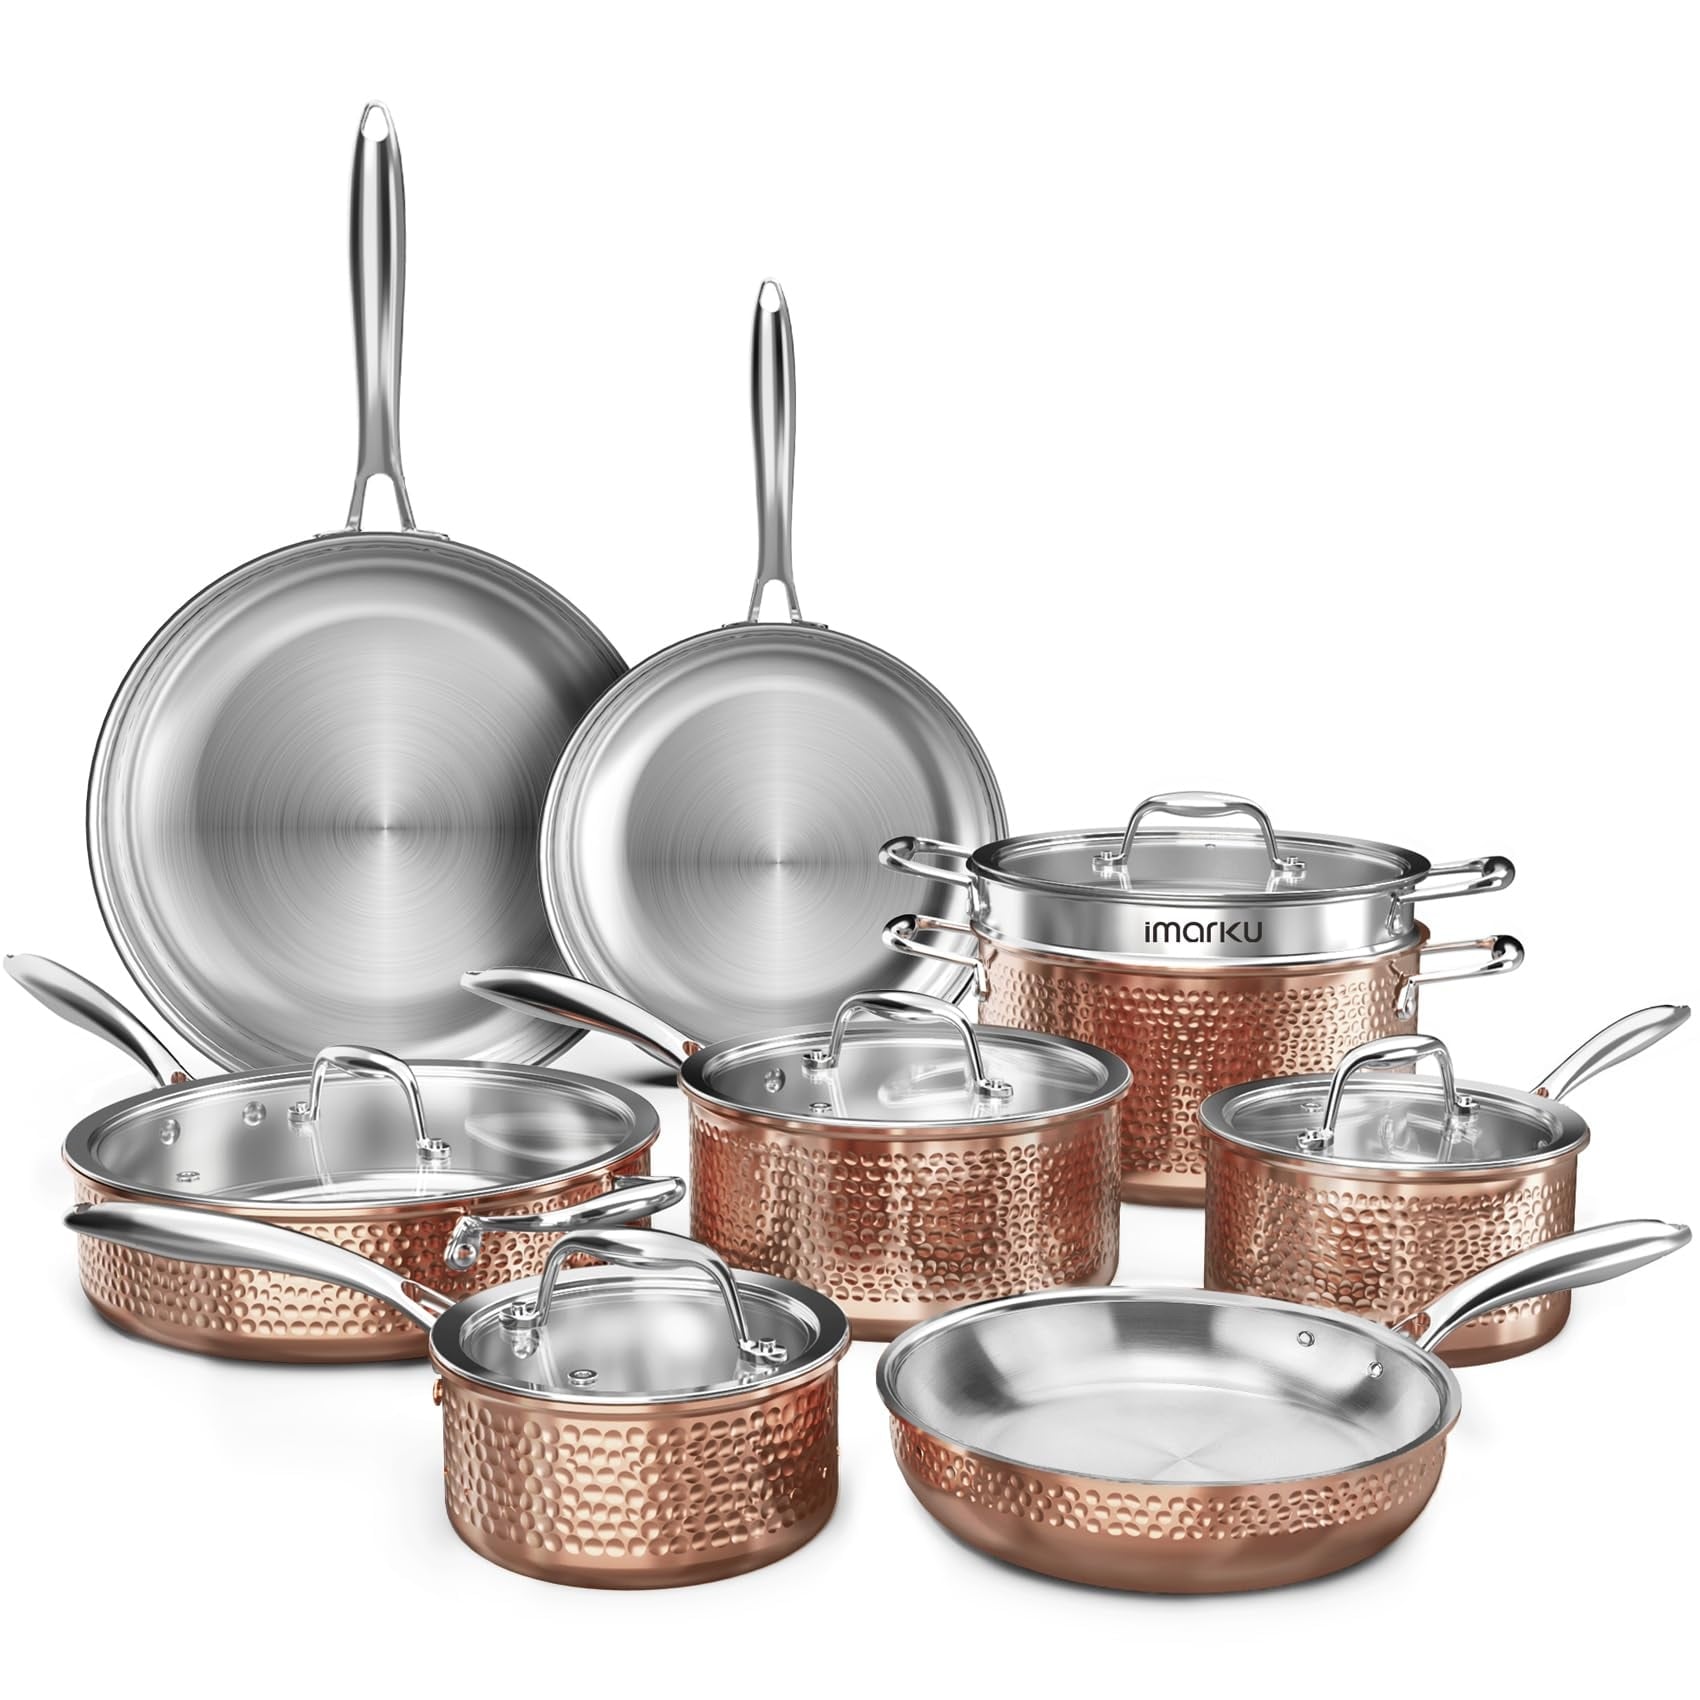 https://ak1.ostkcdn.com/images/products/is/images/direct/1beeff2d6dce48c43a5baab60d922332128a3bee/Stainless-Steel-Pots-and-Pans-Set%2C-14PCS-Kitchen-Cookware-Sets-with-Lids%2C-Non-Toxic-Tri-Ply-Clad-Hammered-Stainless-Steel.jpg